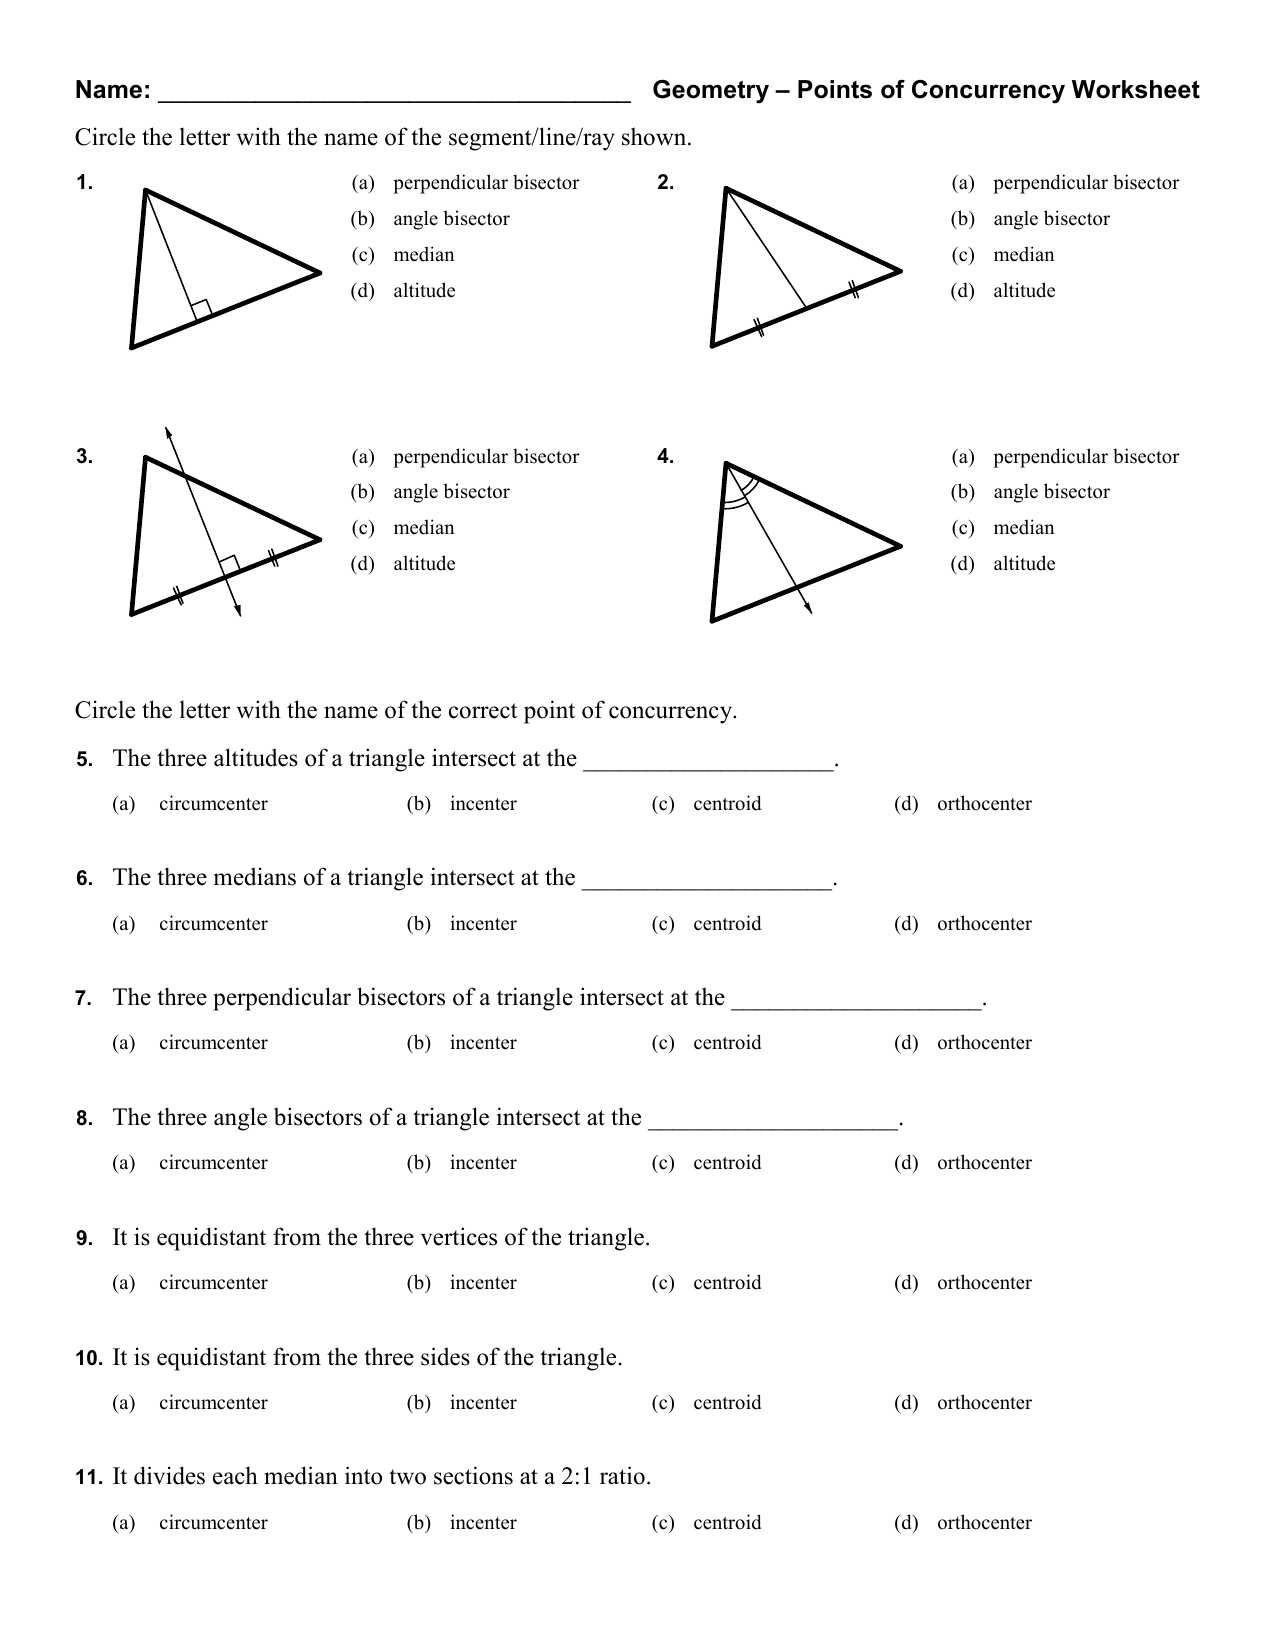 Medians and Centroids Worksheet Answers as Well as Perpendicular Bisector Worksheet Image Collections Worksheet Math